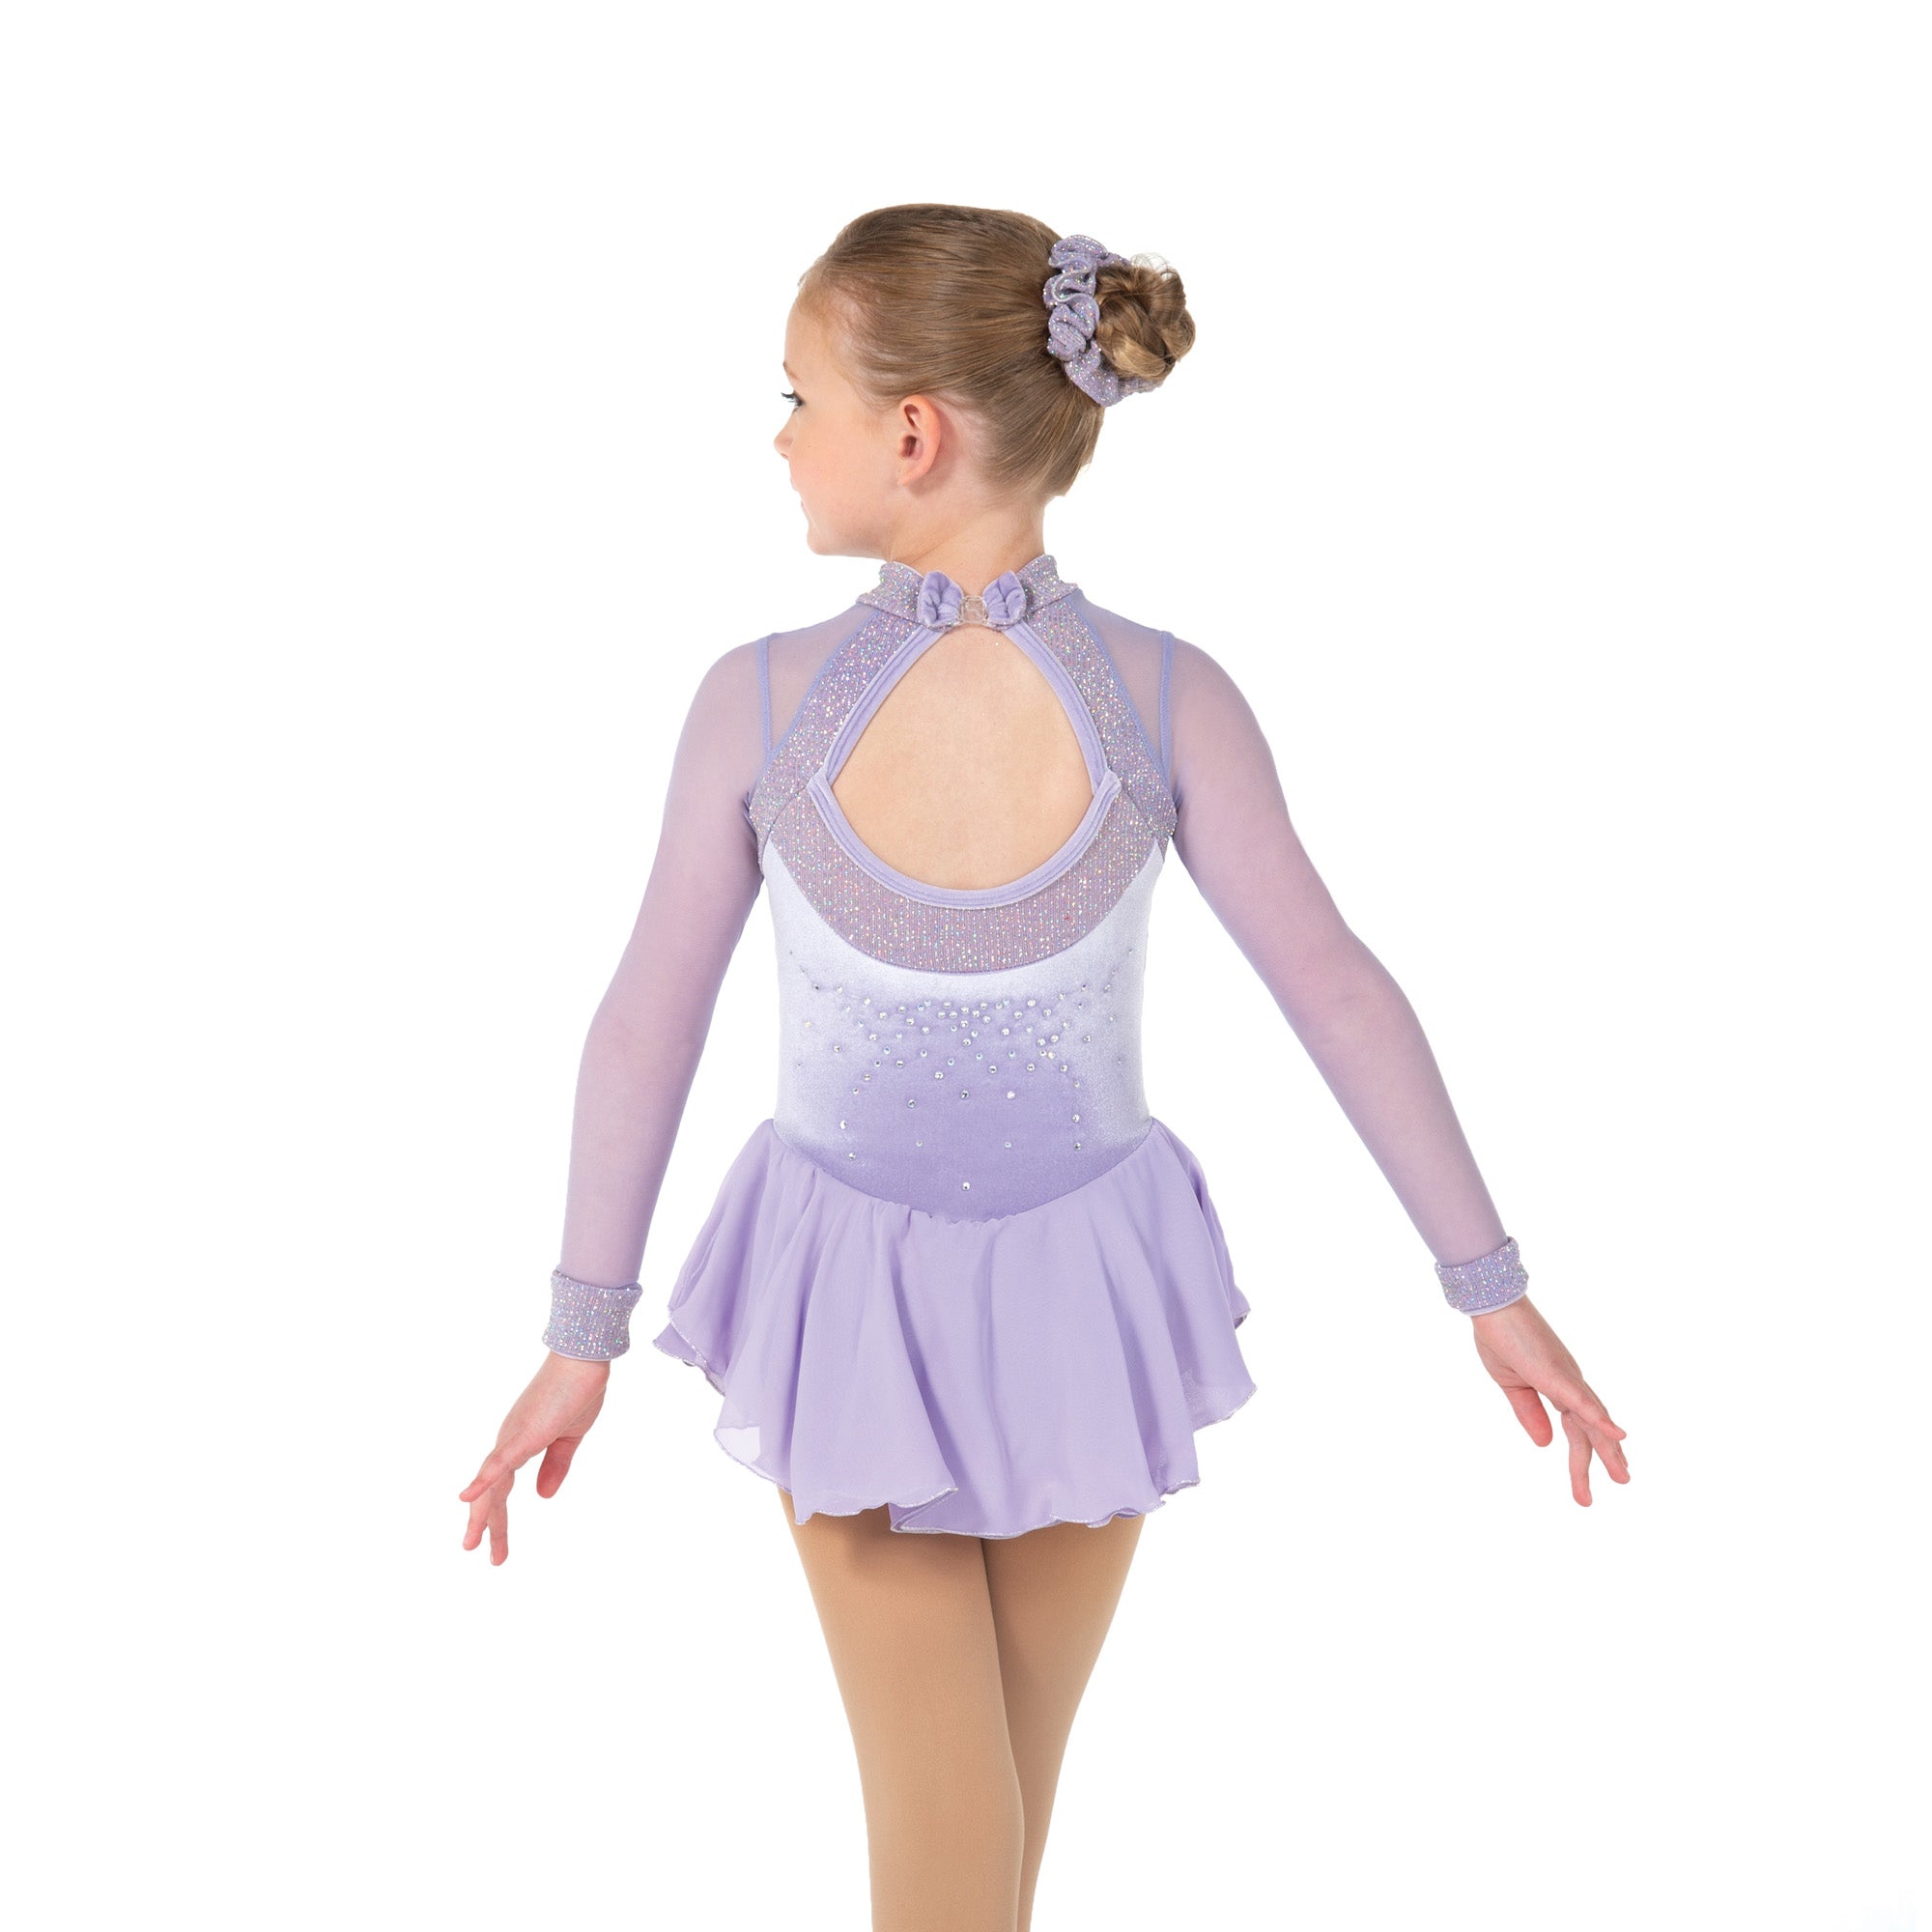 616 Wisteria Wishes Skating Dress by Jerry's